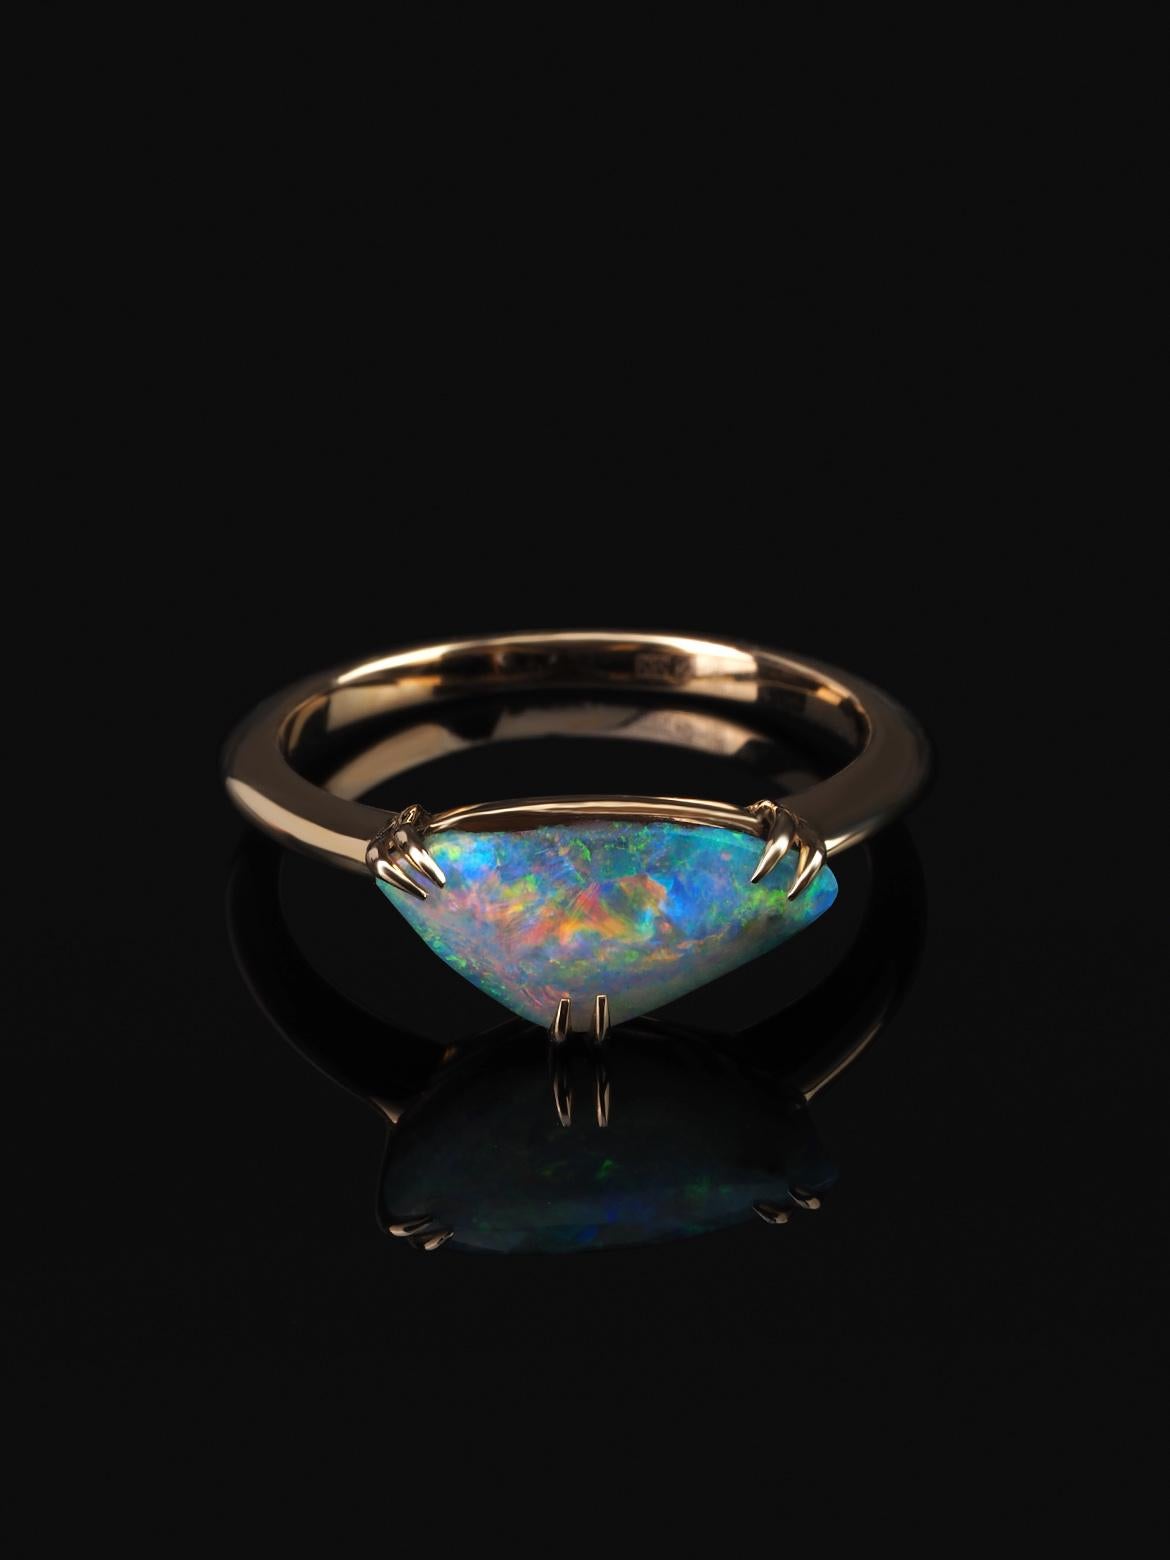 Boulder opal 14K gold ring
opal origin - Australia 
opal measurements - 0.16 х 0.24 х 0.51 in / 3 х 6 х 13 mm
stone weight - 2.83 carat
ring weight - 2.96 grams
ring size - 7 US

Collection: Minimal


We ship our jewelry worldwide – for our